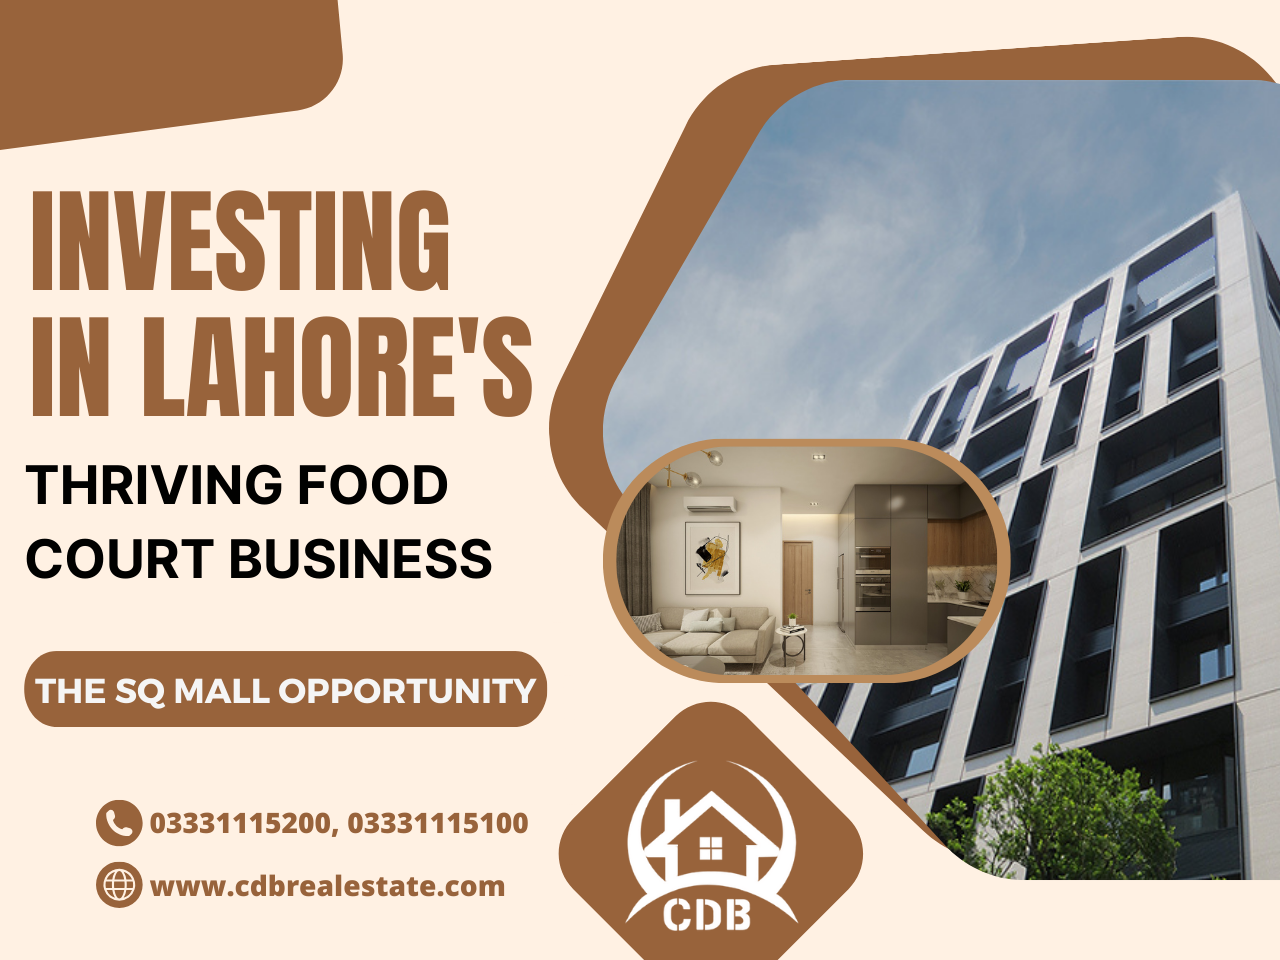 Investing in Lahore's Thriving Food Court Business: The SQ Mall Opportunity